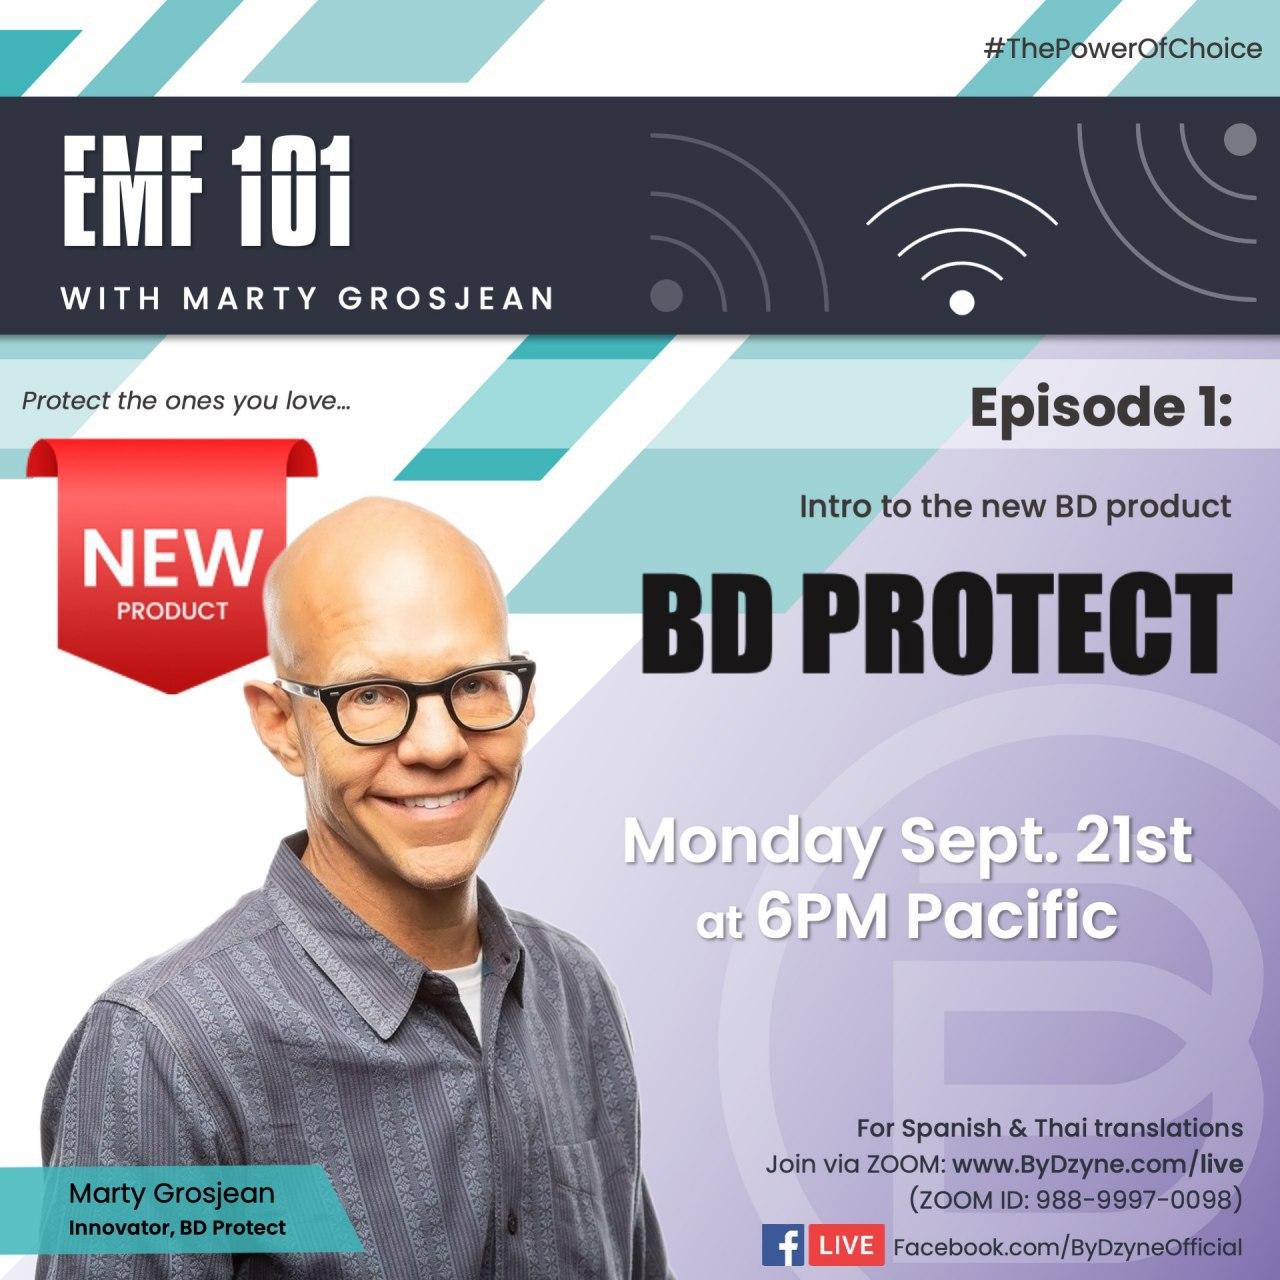 EMF 101 RECAP: Episode 1 Intro to the new BD Protect products